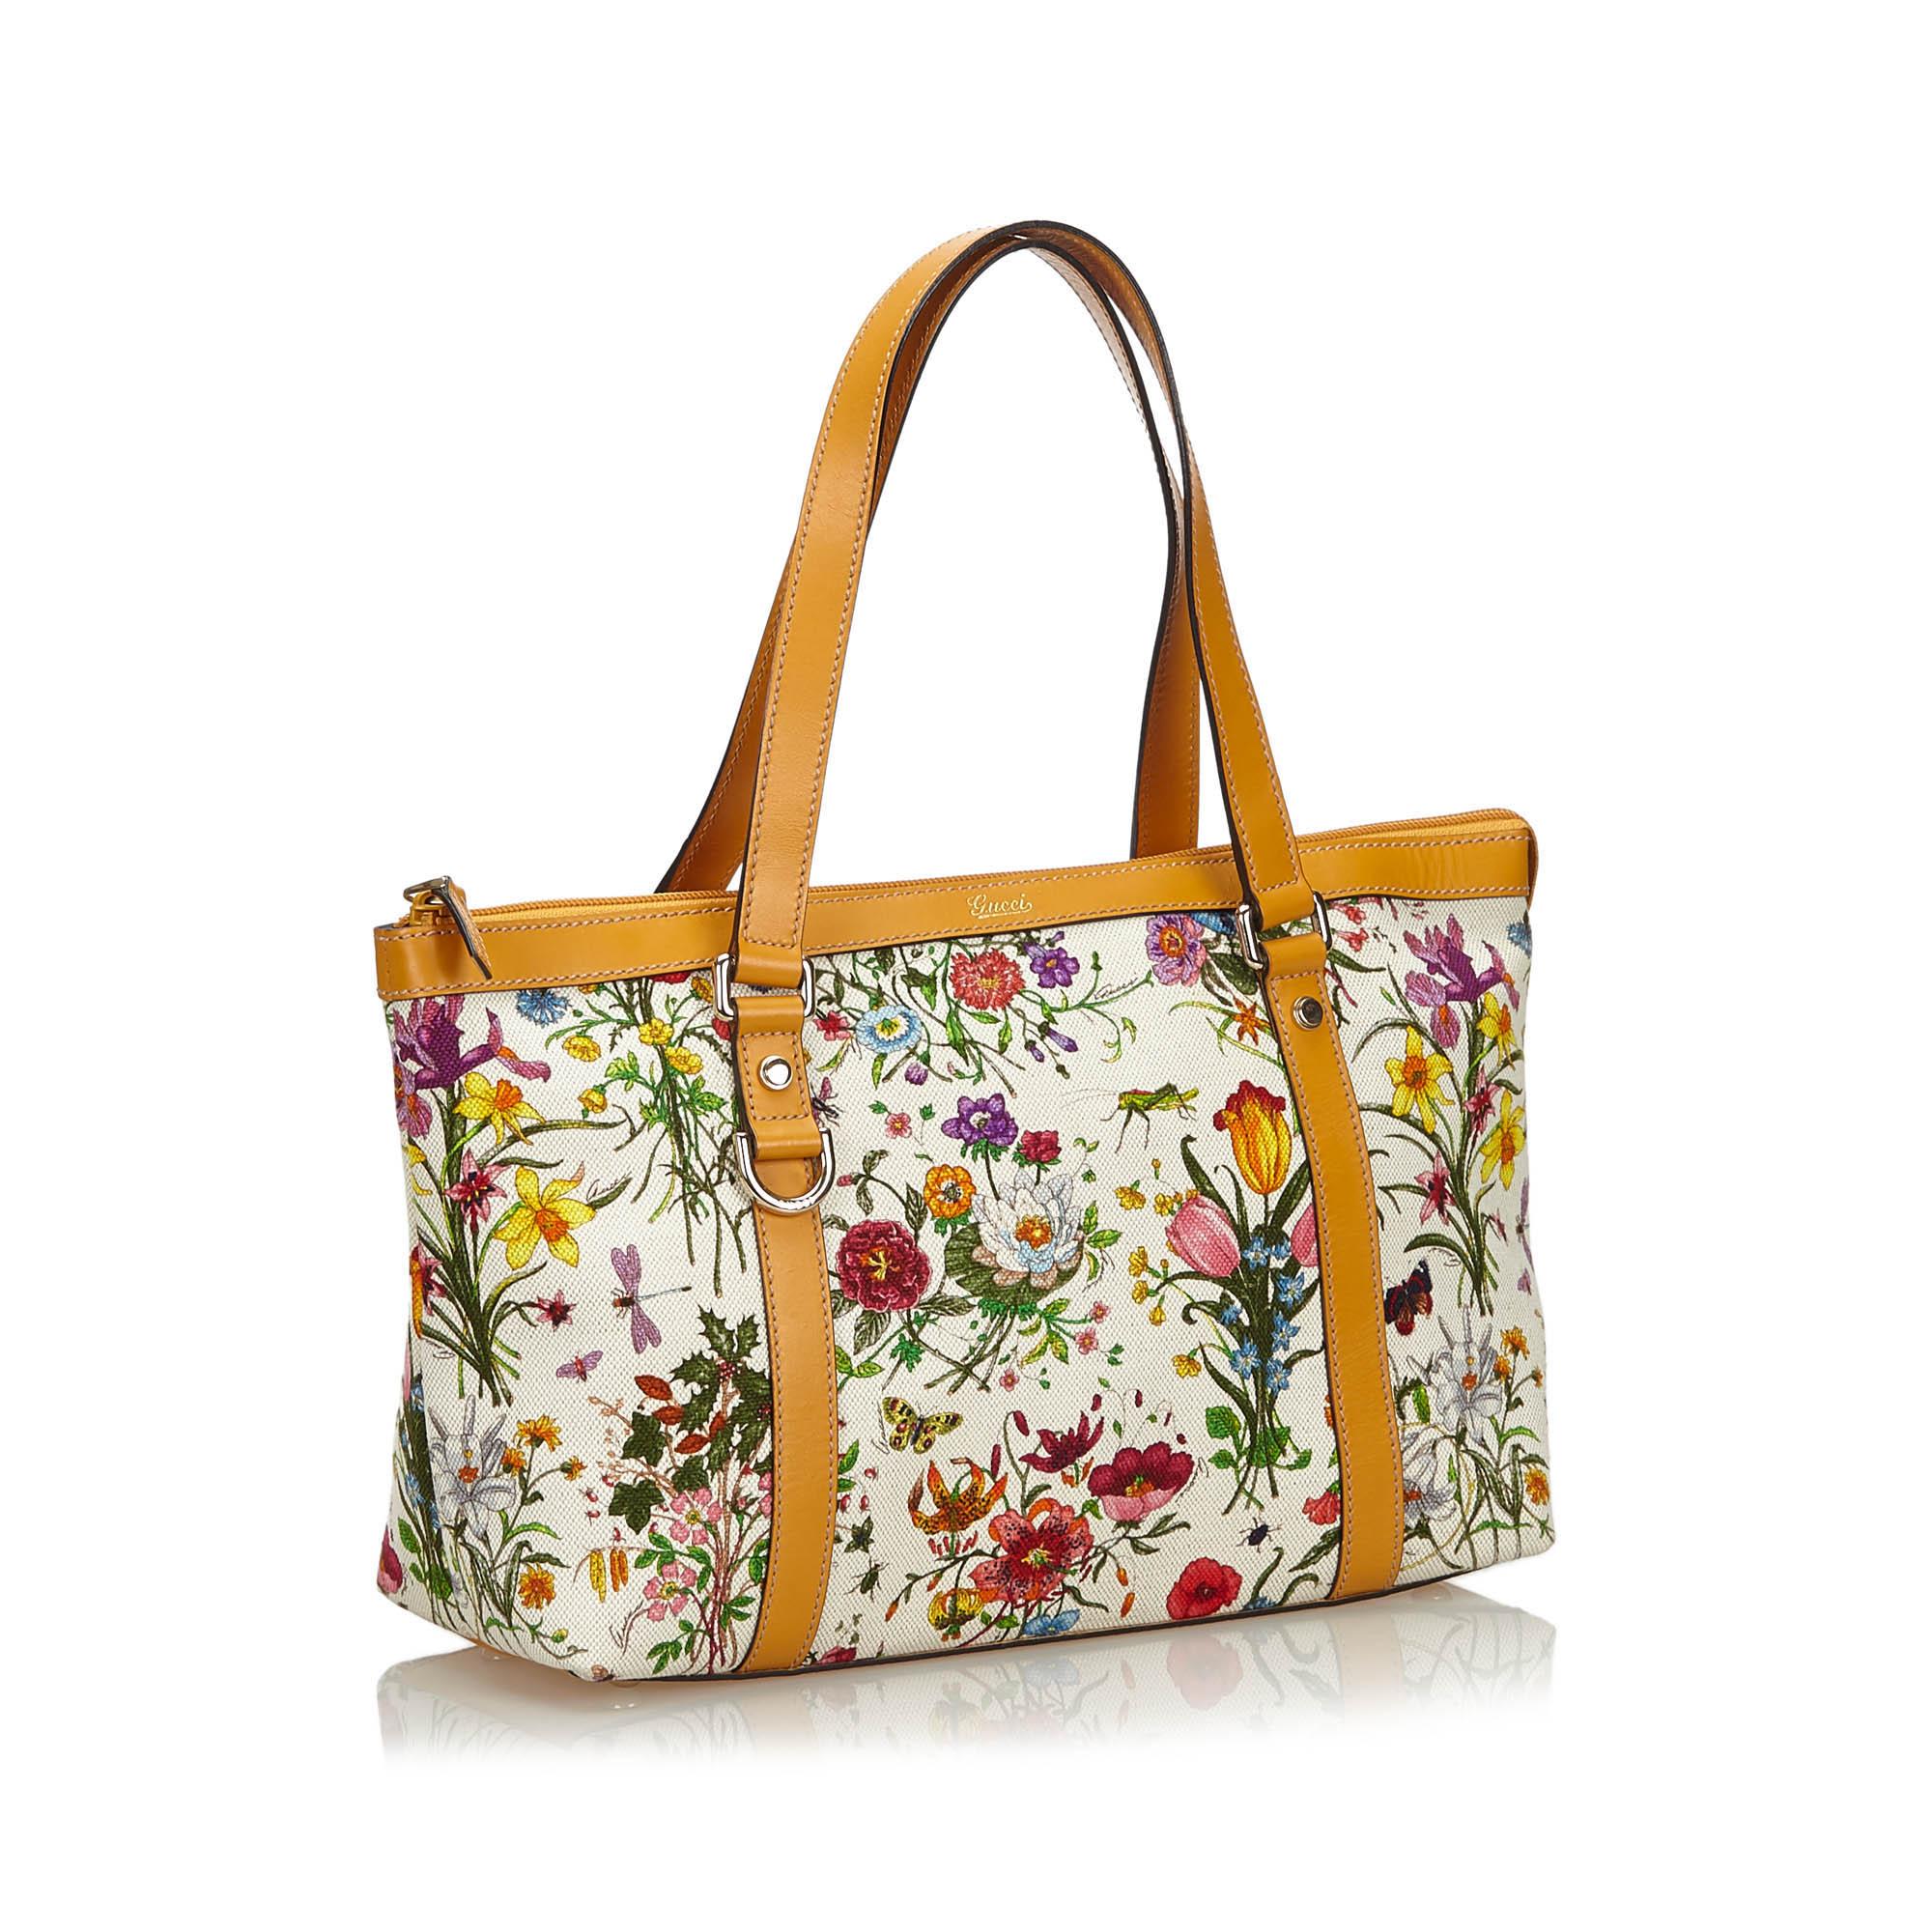 The Abbey tote bag features a floral printed canvas body with leather trim, flat leather handles, a top zip closure, and interior zip and slip pockets. It carries as AB condition rating.

Inclusions: 
This item does not come with